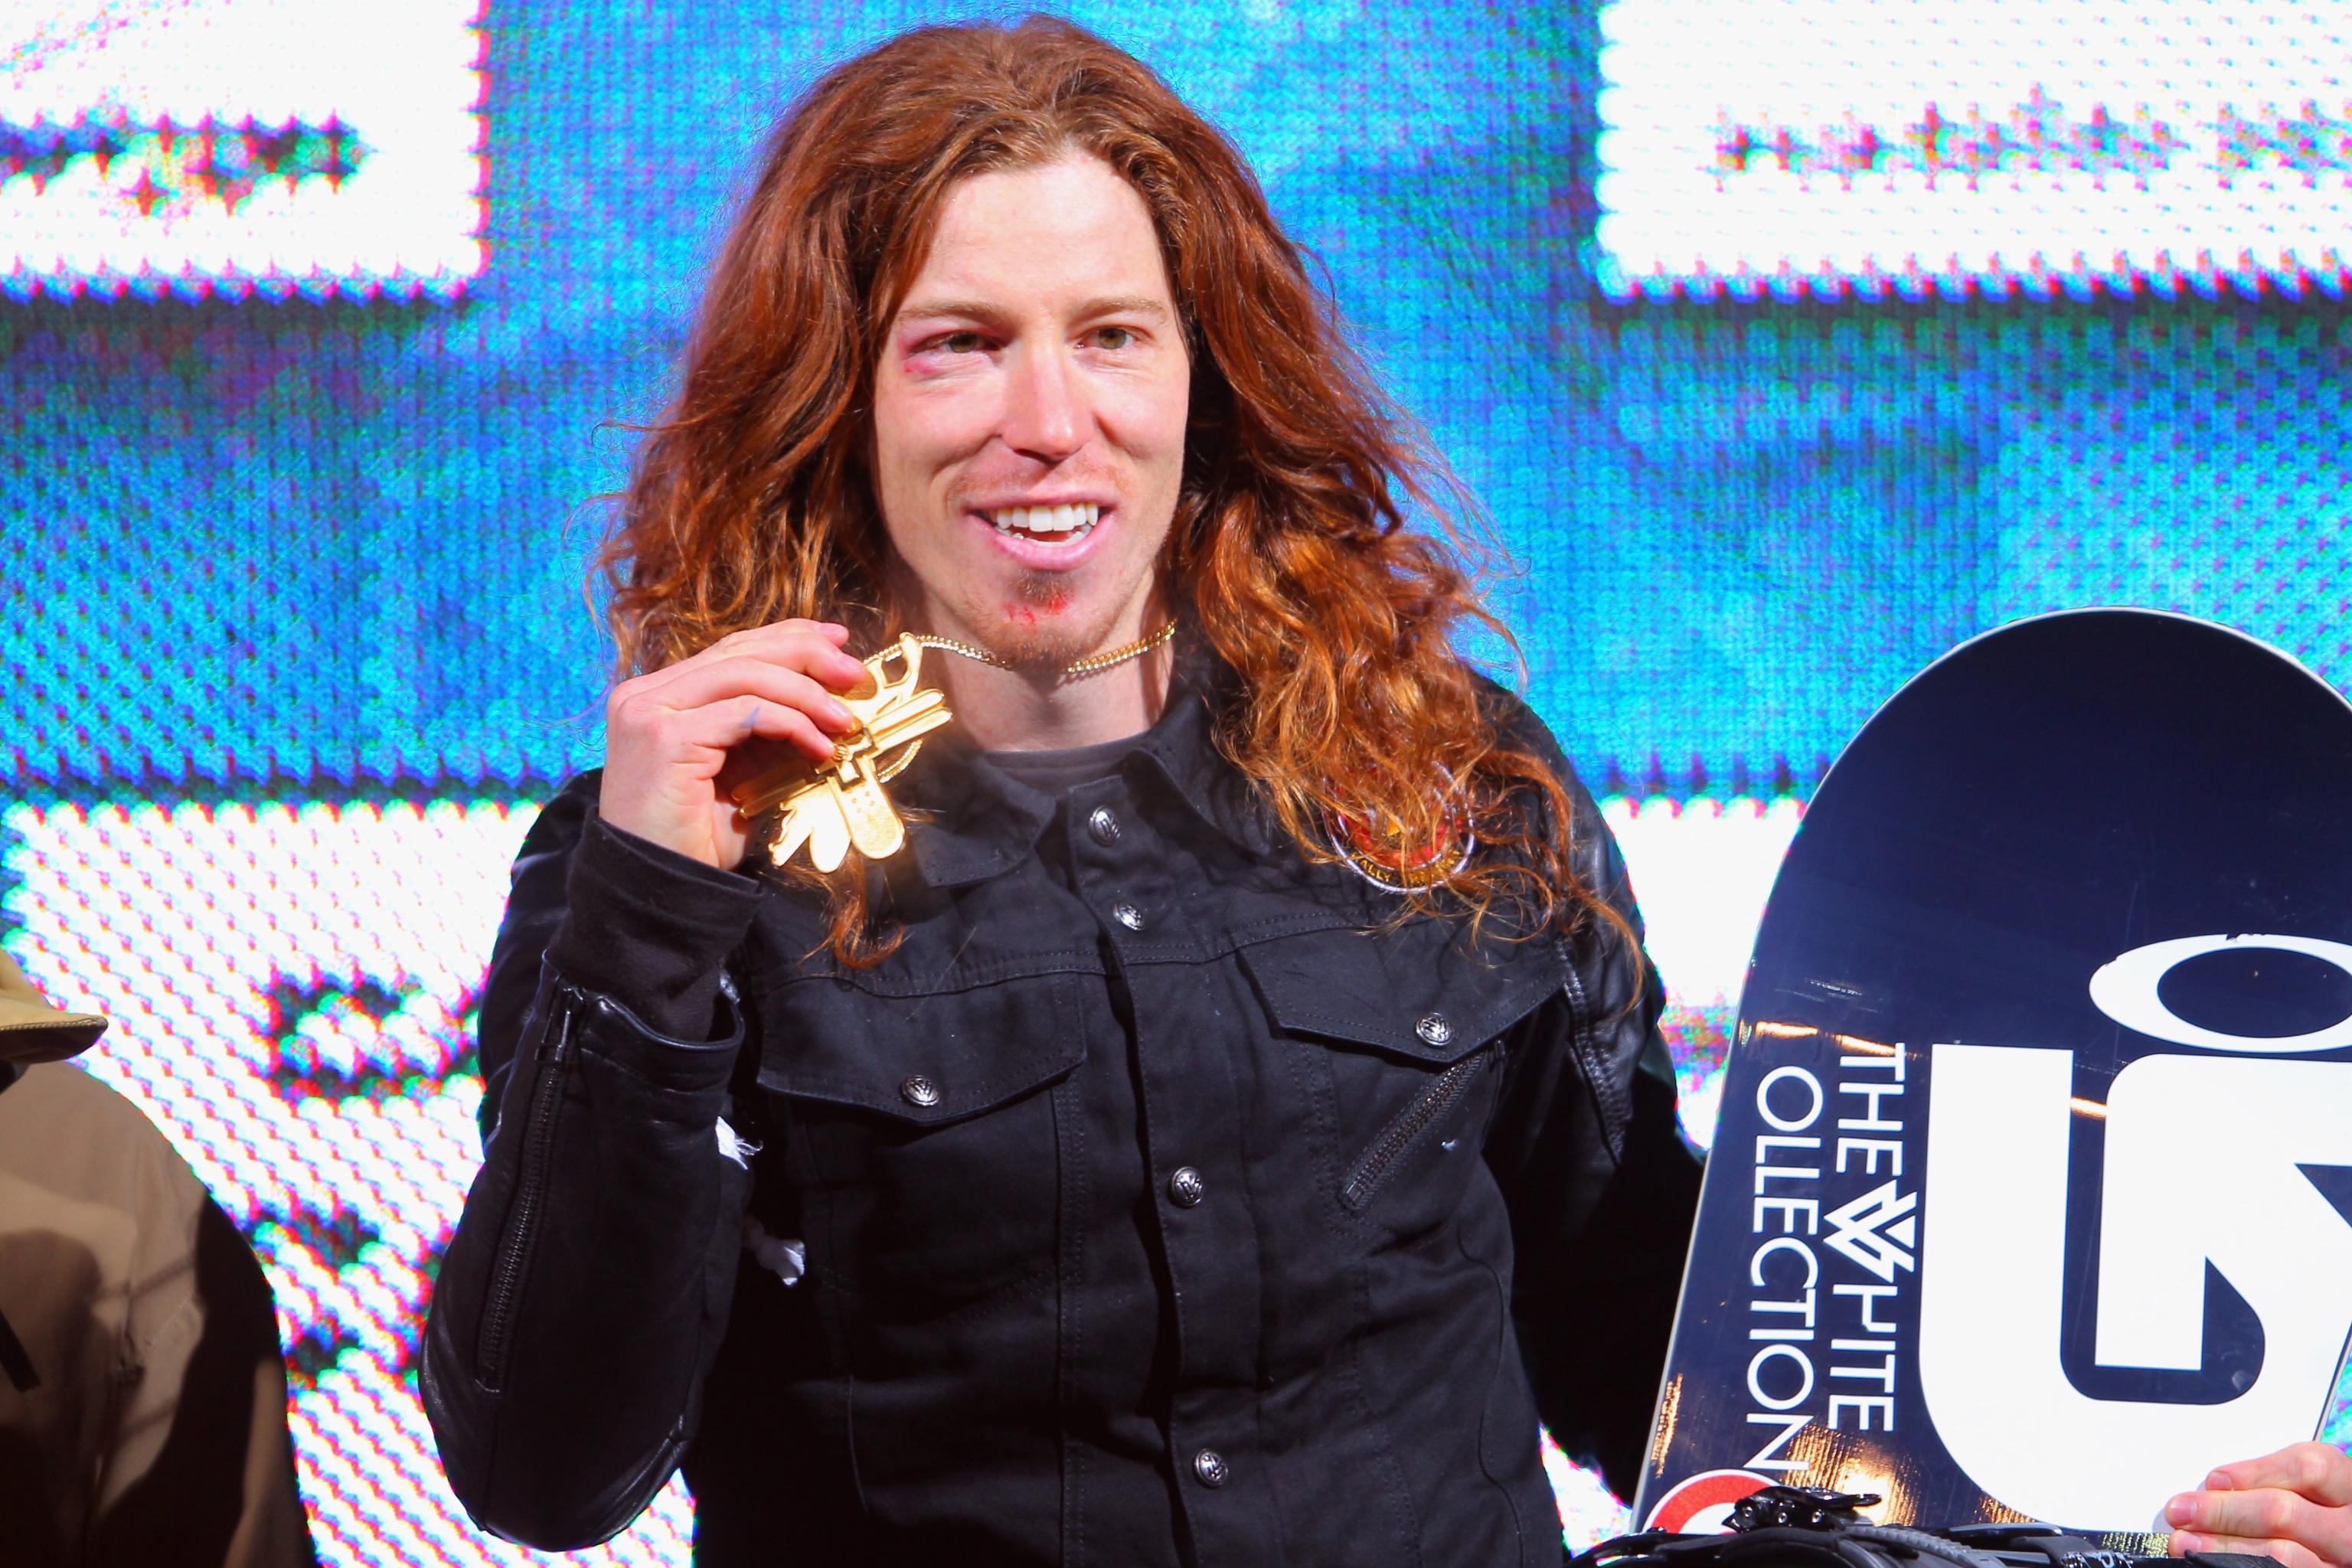 Shaun White: The Guy who Raised the Bar in Snowboarding